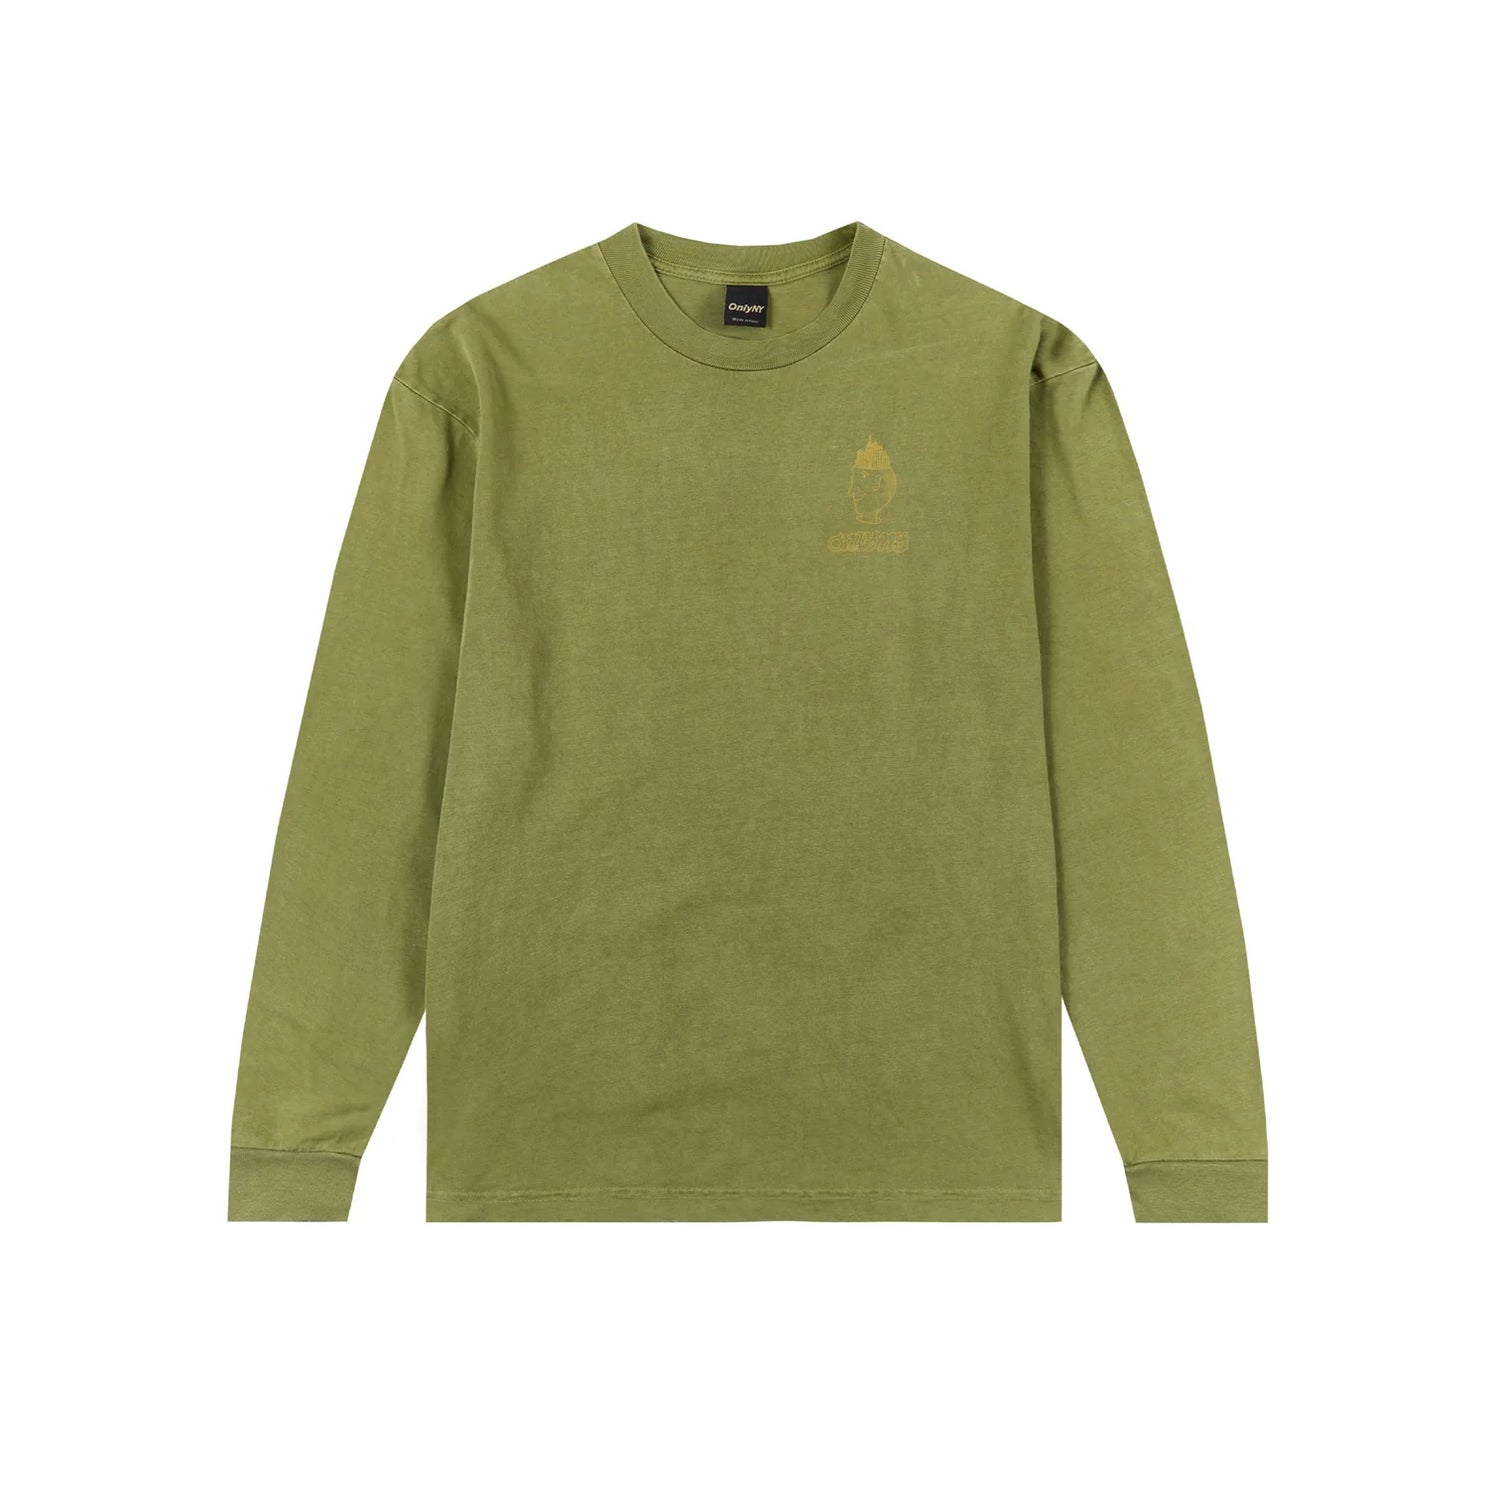 Only NY Astral Trip Long Sleeve T-Shirt - Moss Green